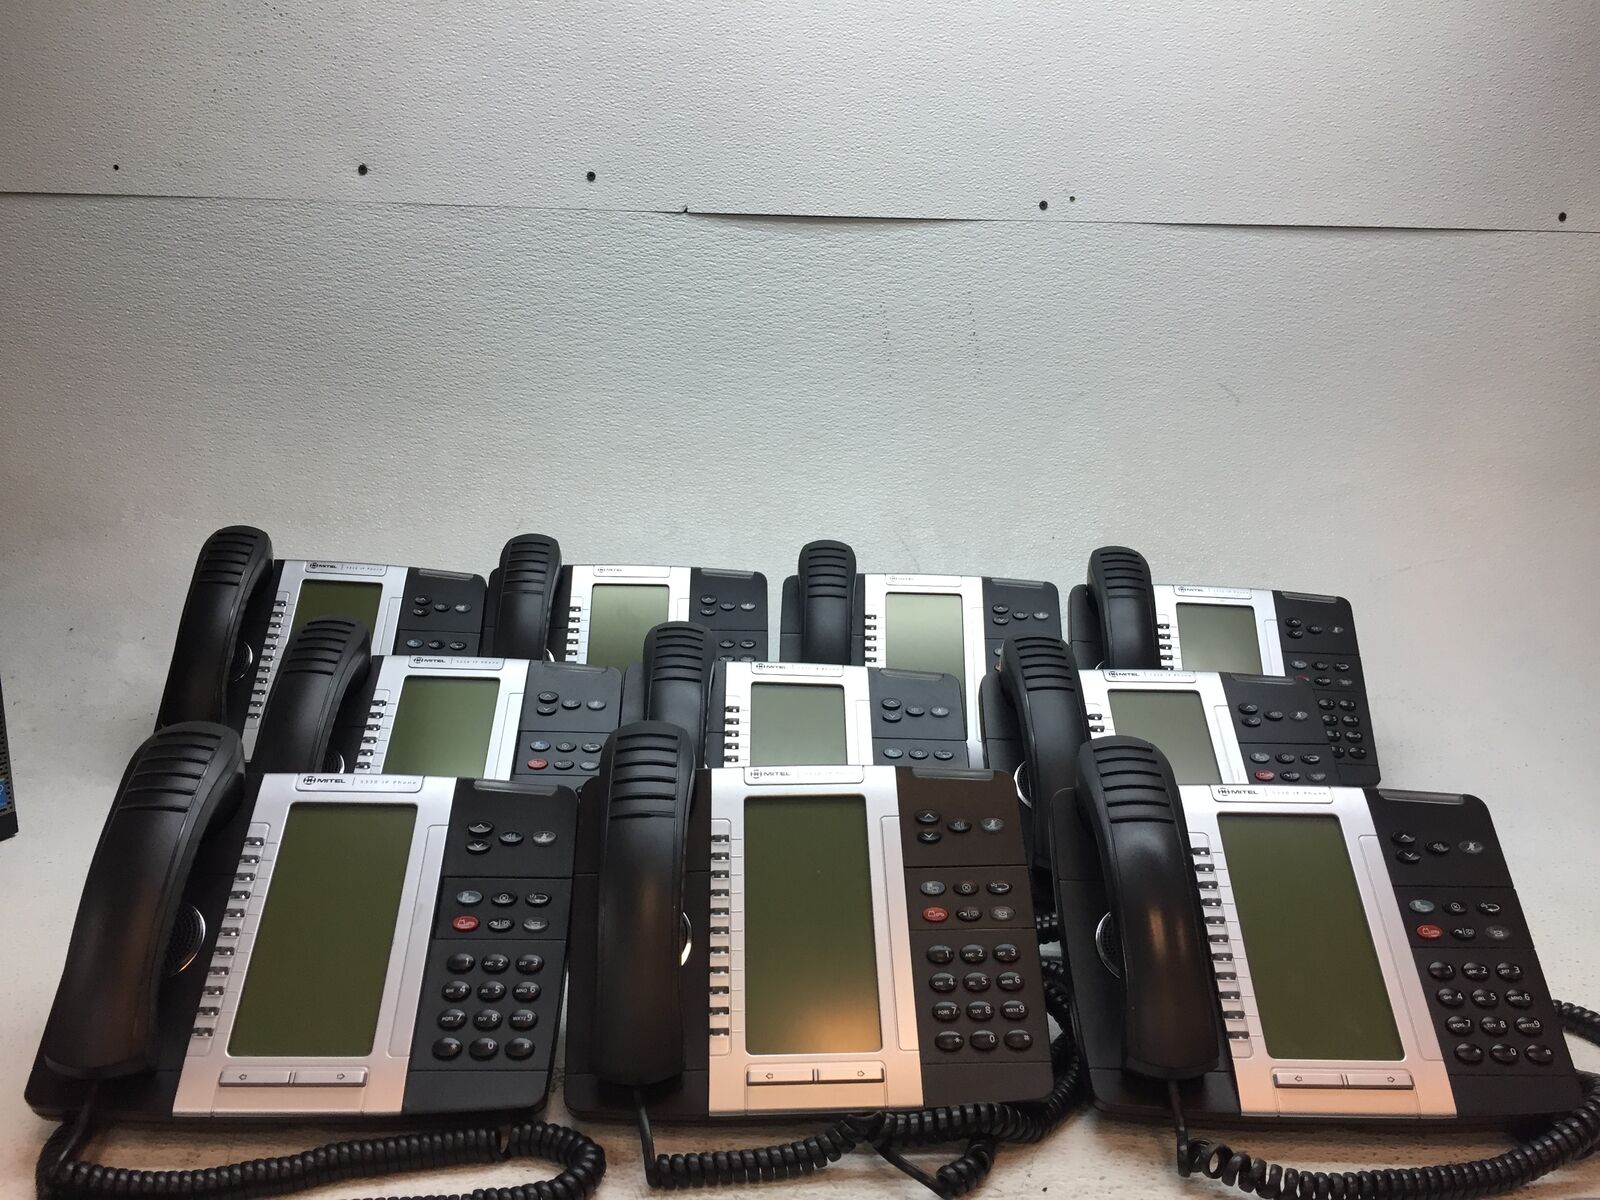 Lot of 10 Mitel 5330 IP VoIP Dual Mode Office Phones w/ Handsets & PoE Stands